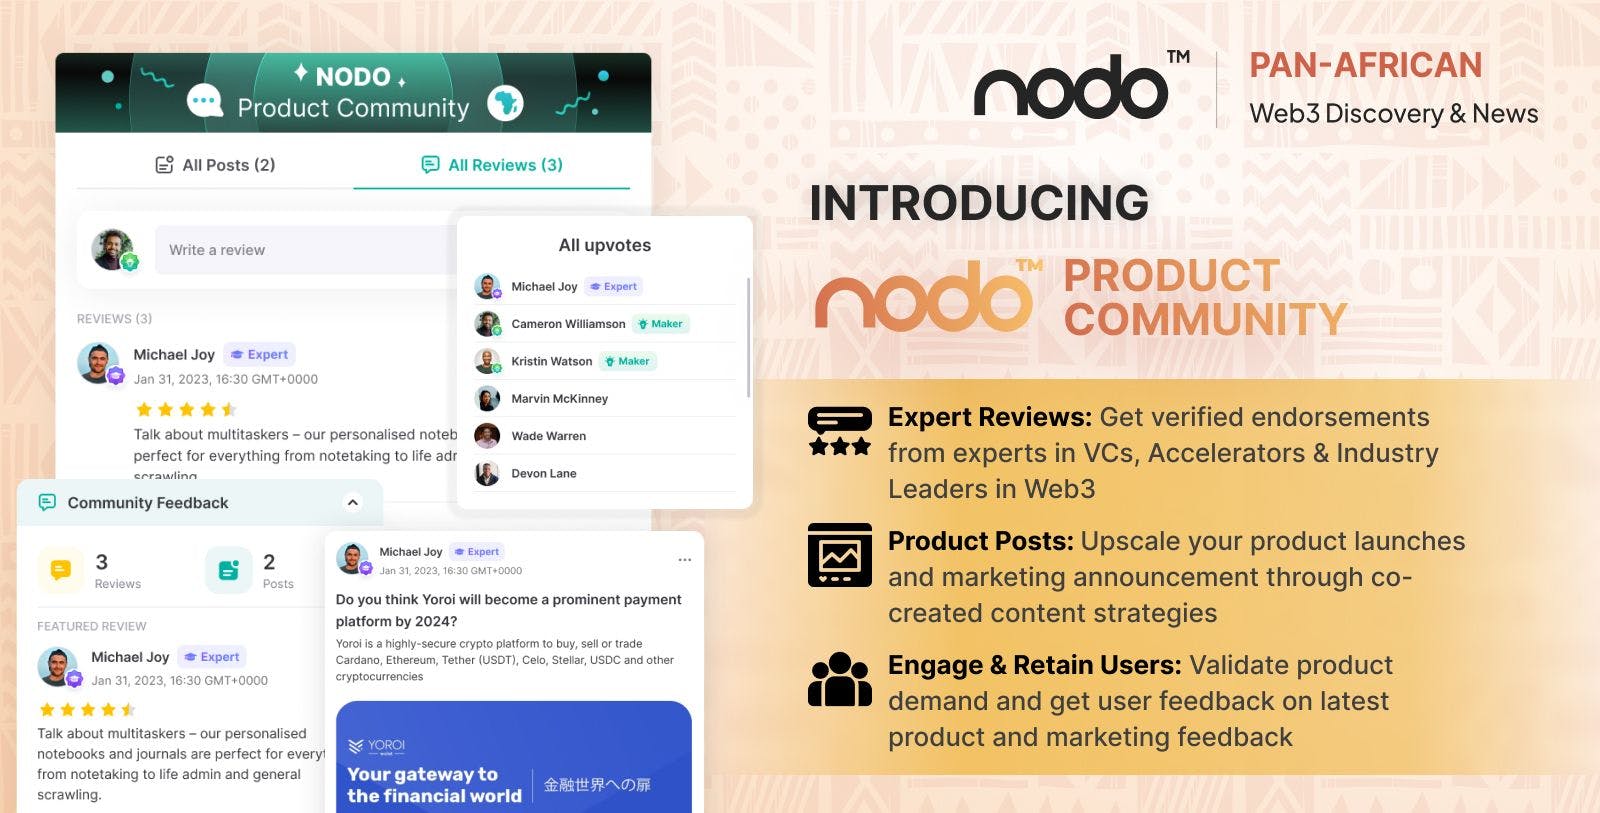 NODO Launches Product Community: New Marketing & Publicity Channels for Web3 Project Builders & Experts in the Pan-African Tech Ecosystem